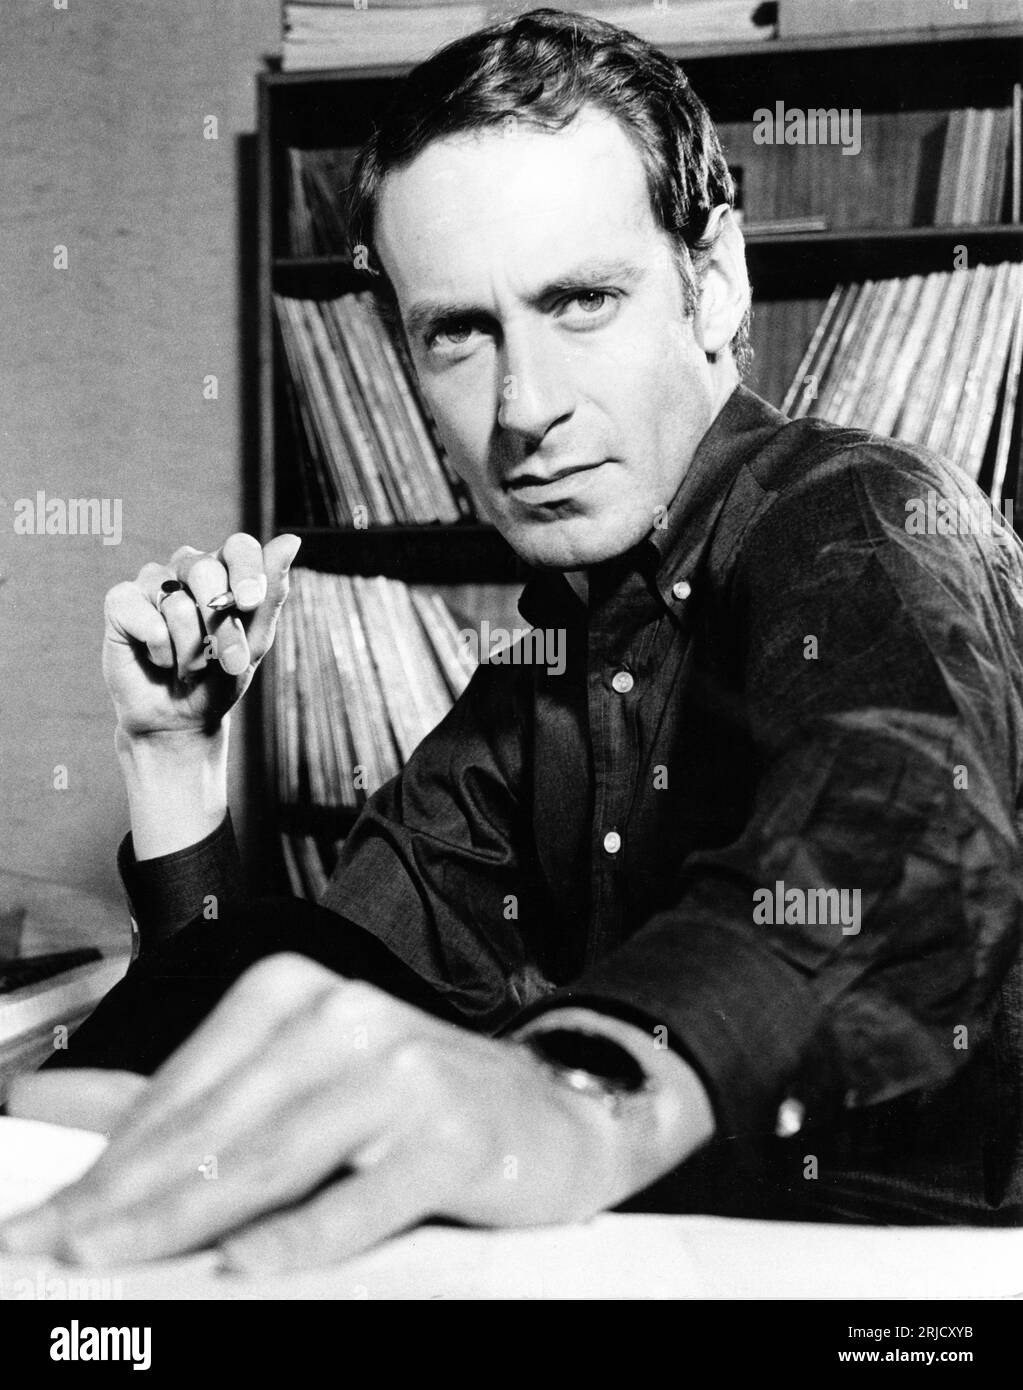 Film Composer JOHN BARRY candid portrait at home in September 1964 by CLIFFORD JONES STUDIOS LTD., London SW1 Stock Photo